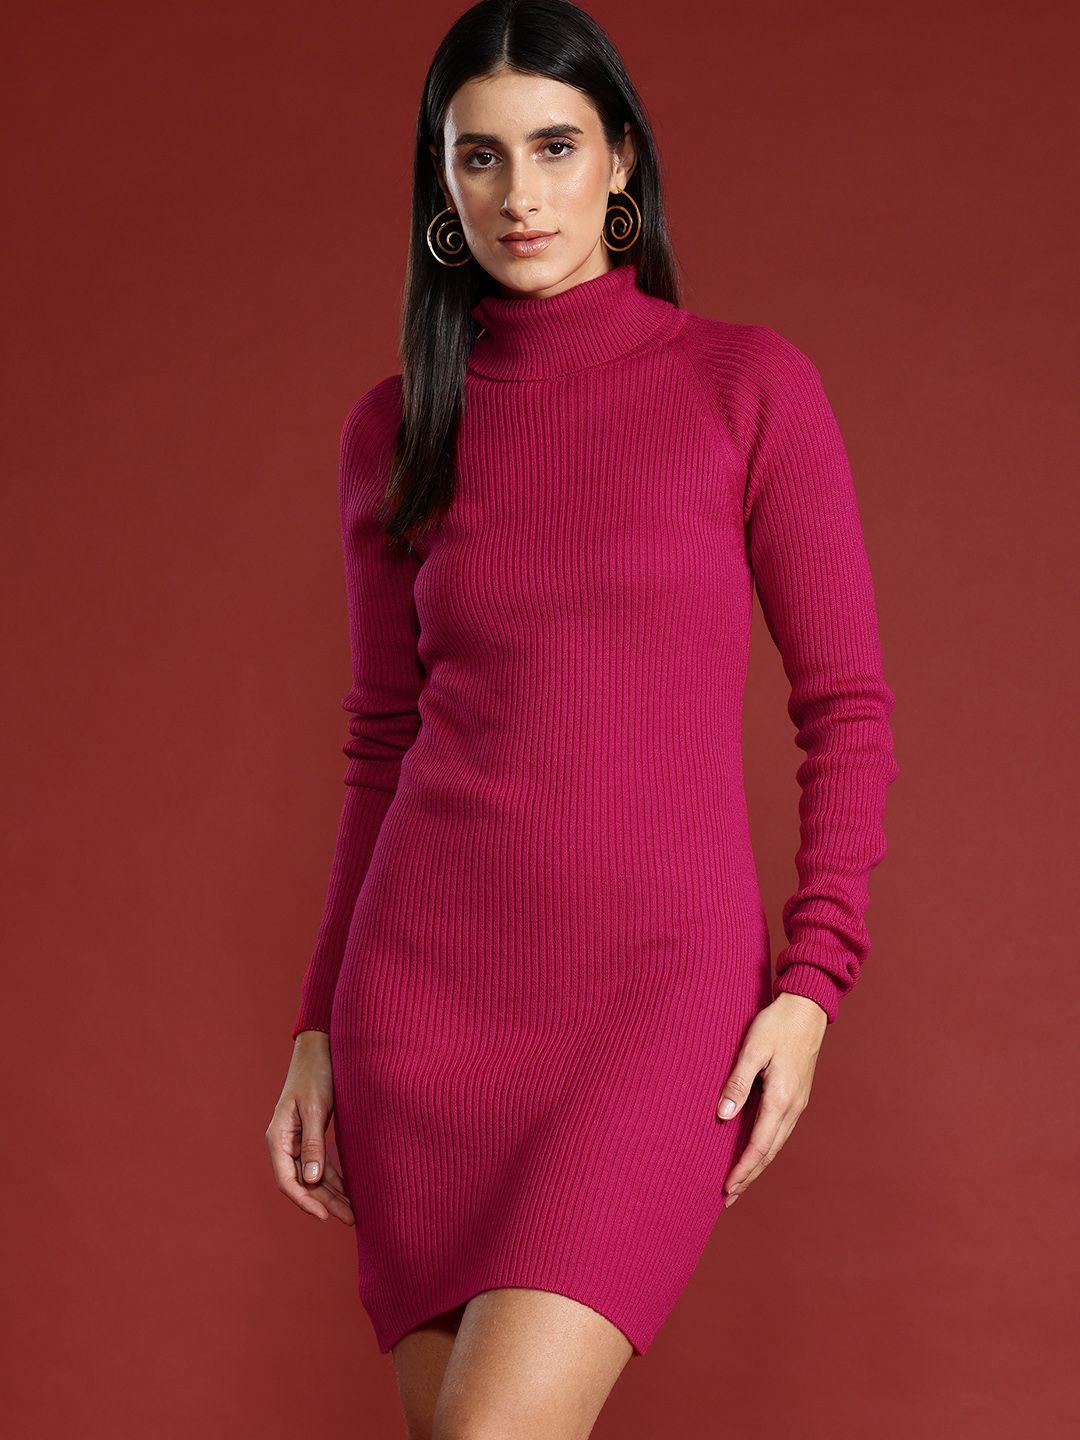 all about you solid turtle neck raglan sleeves ribbed acrylic jumper dress